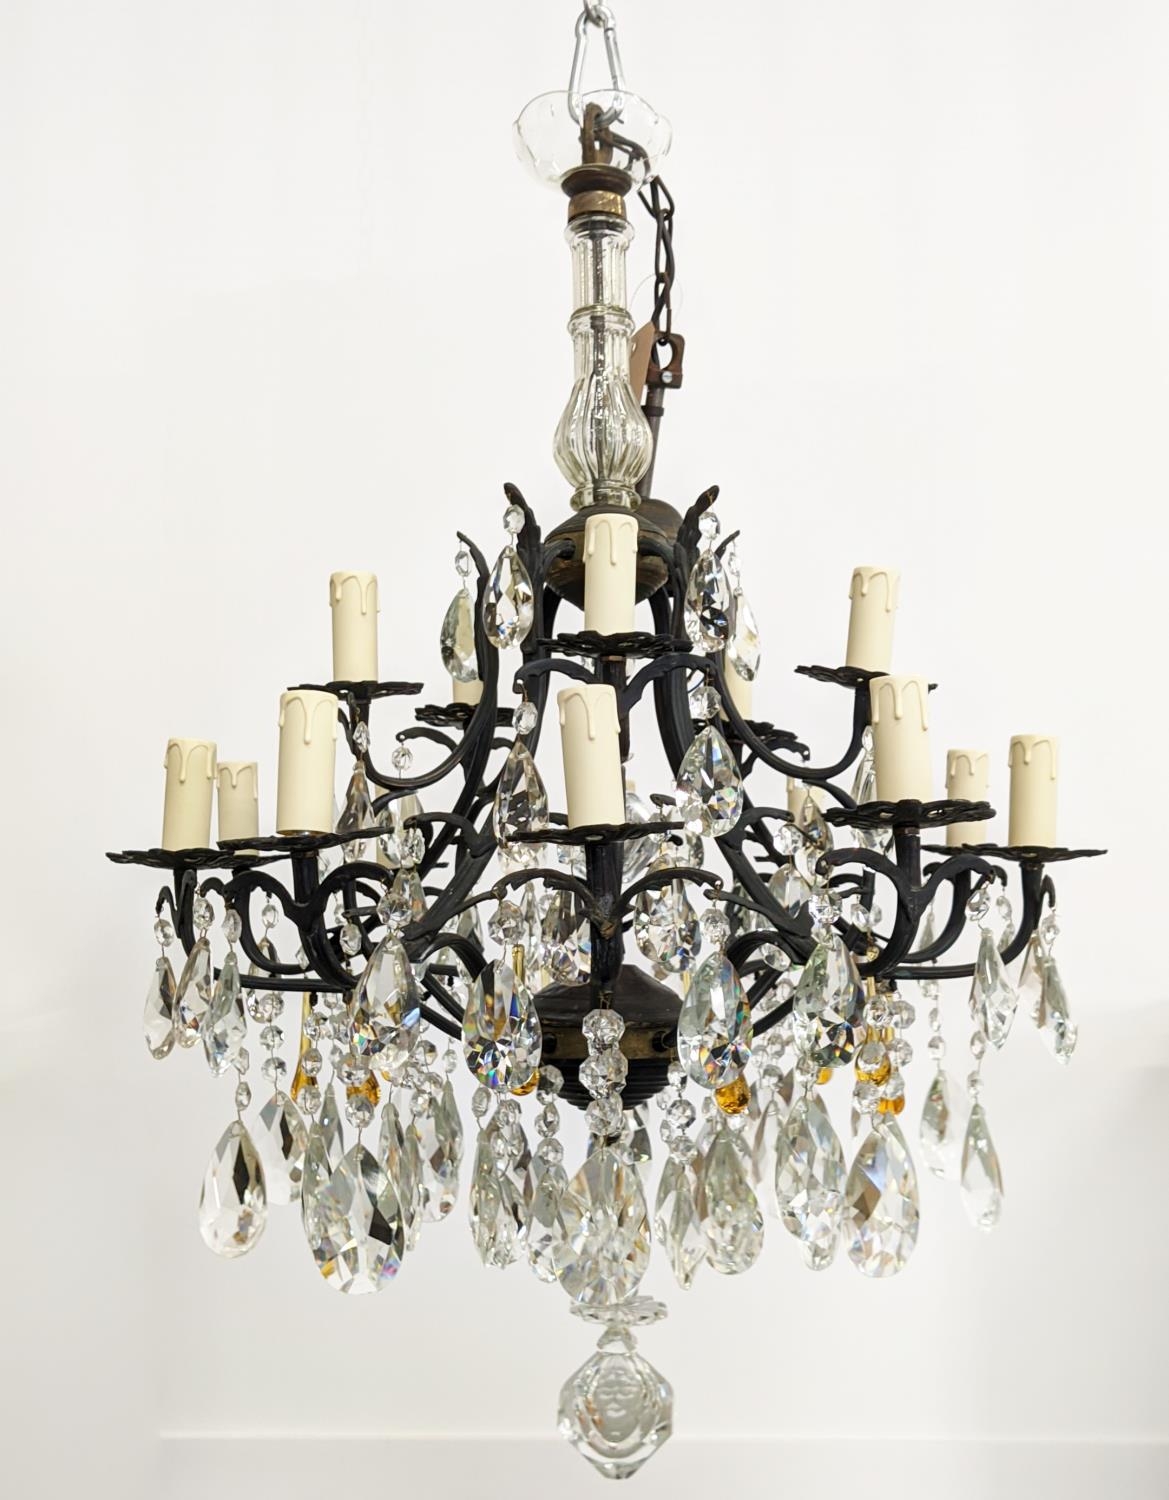 CHANDELIER, patinated metal with clear and amber glass drops from fifteen lights, 60cm W x 114cm - Image 7 of 18